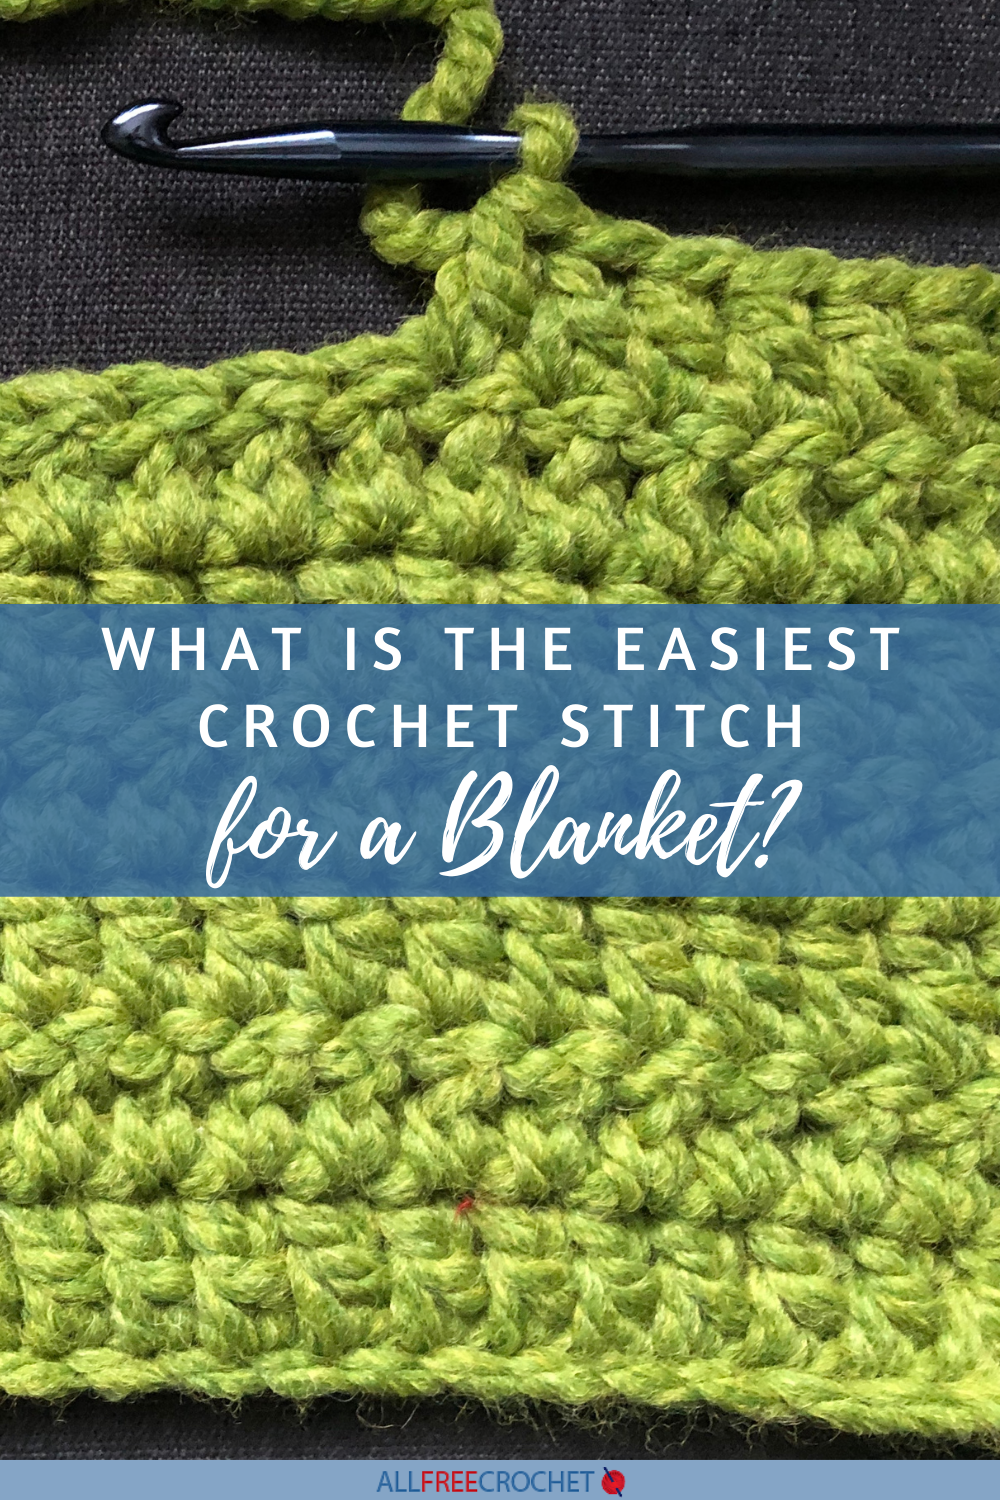 Easy Crochet Stitches for Blankets - My Crochet Space